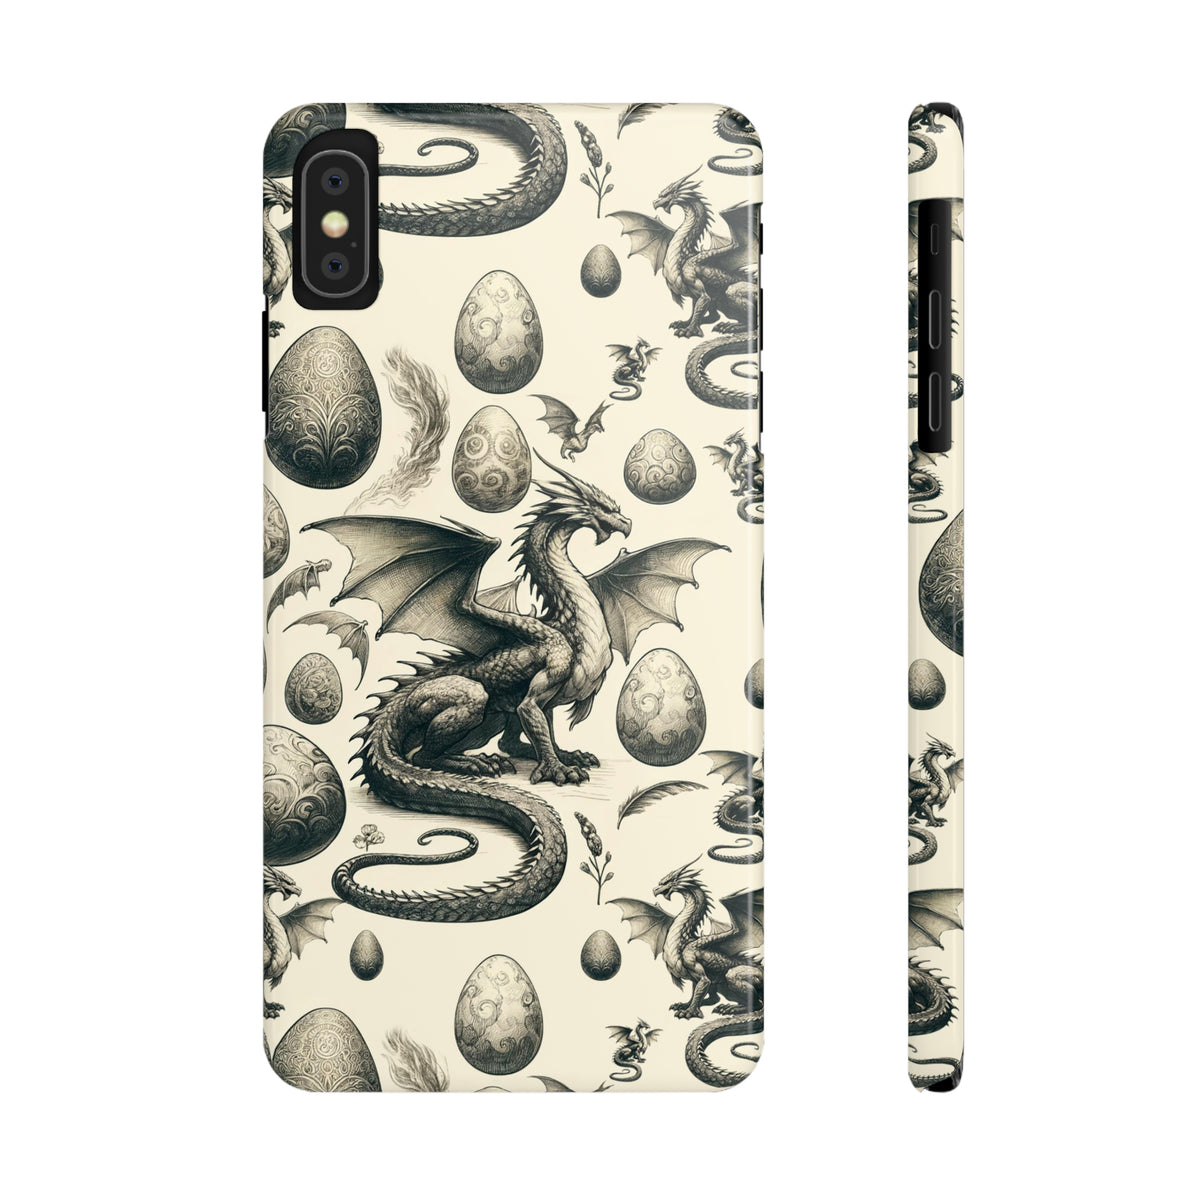 Magical Dragon in Wizard Phone Case